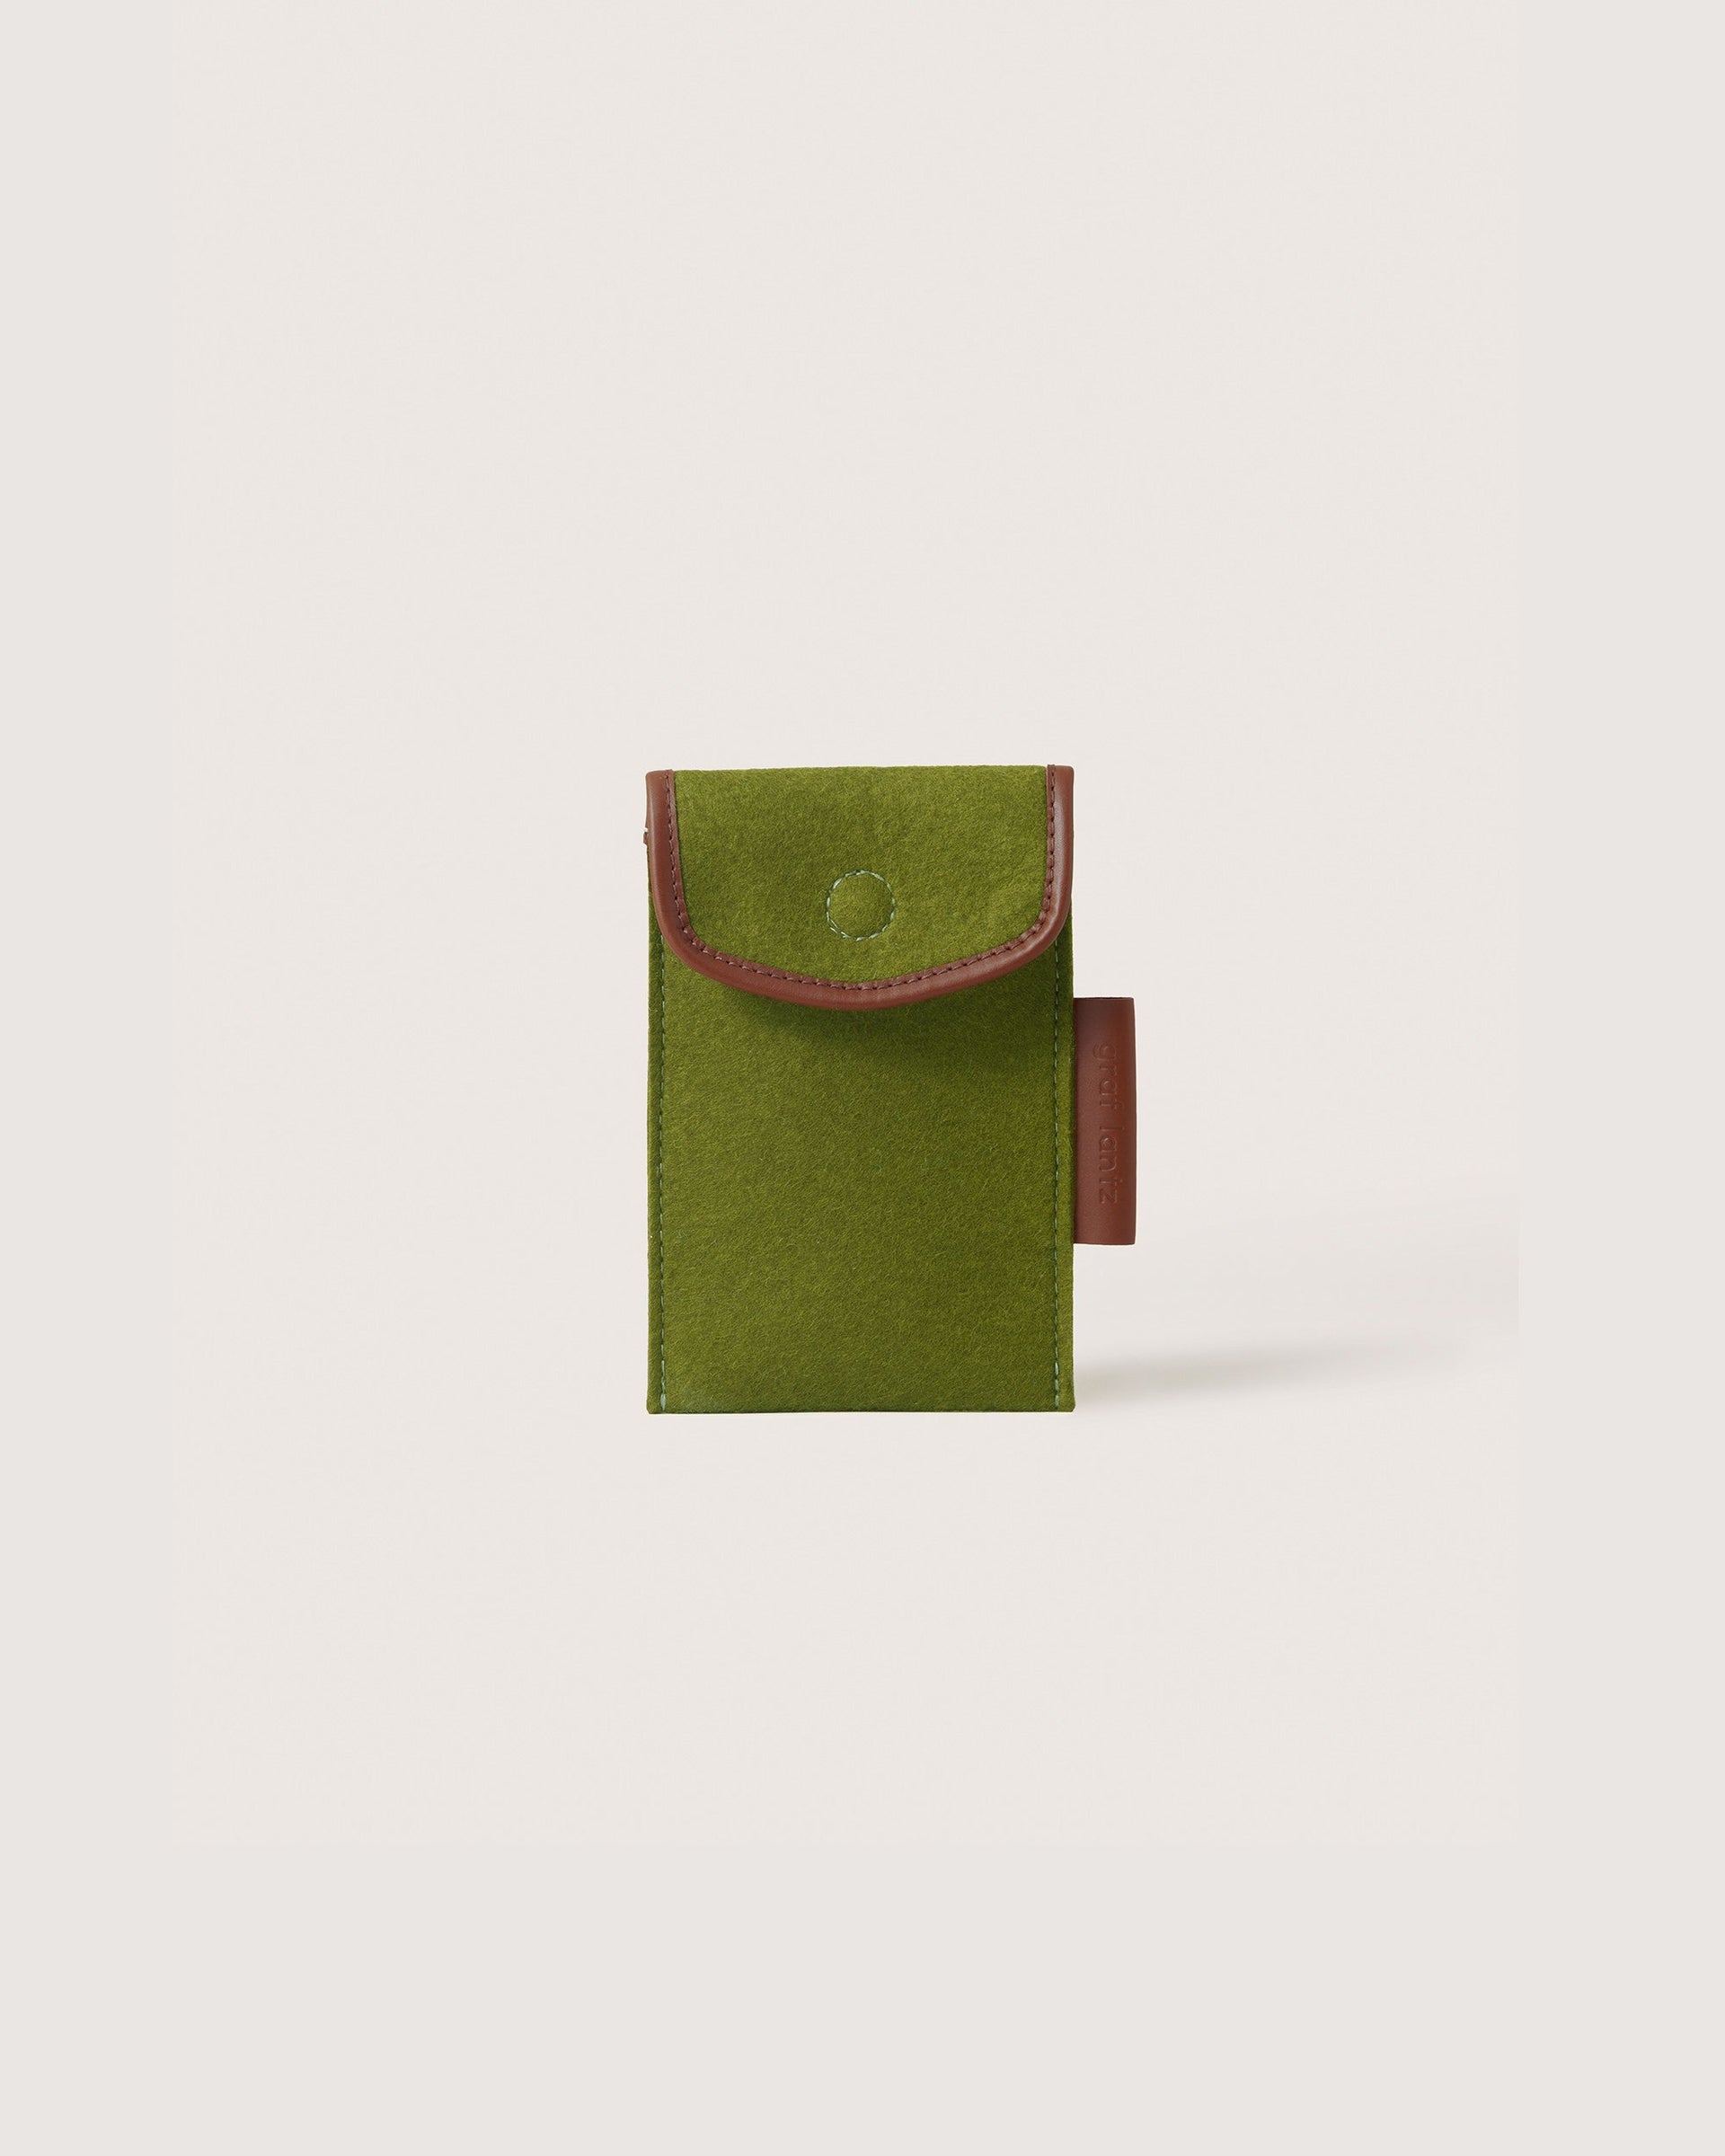 Merino Wool Envelope Accessory Sleeve in moss green with brown leather application, front view